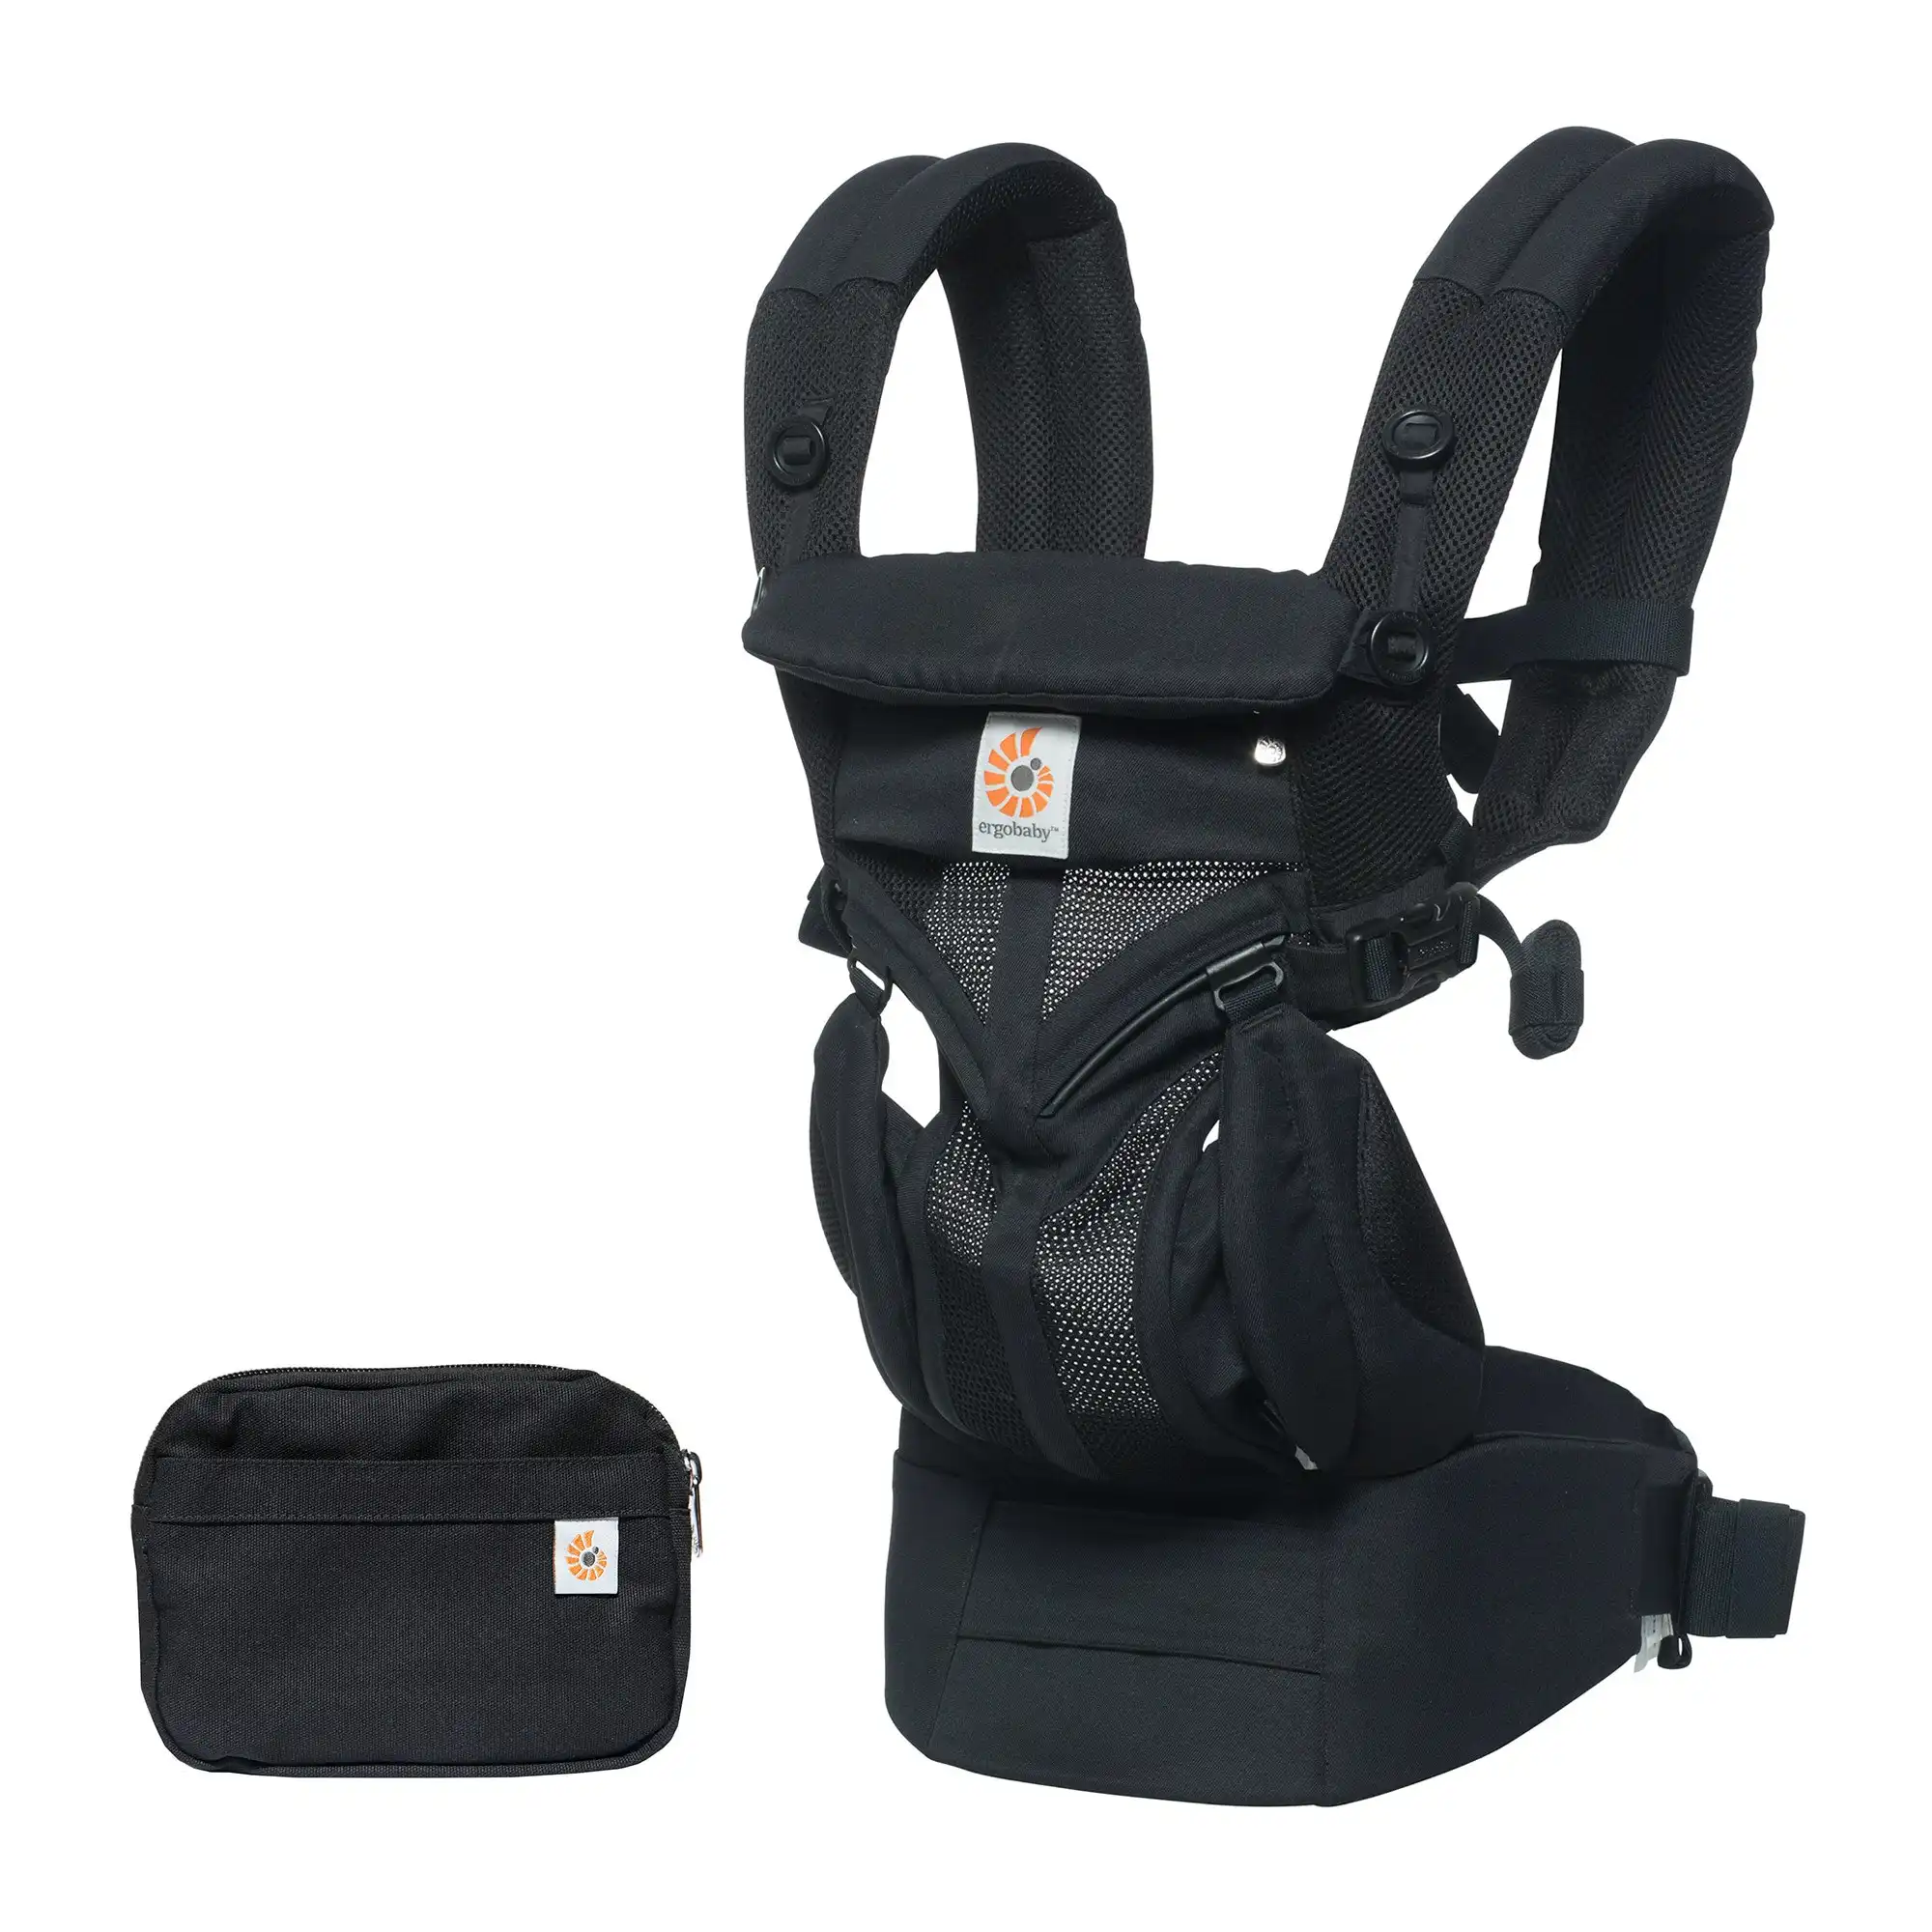 Ergobaby Omni 360 All Position Baby Carrier Cool Air Mesh - Onyx Black